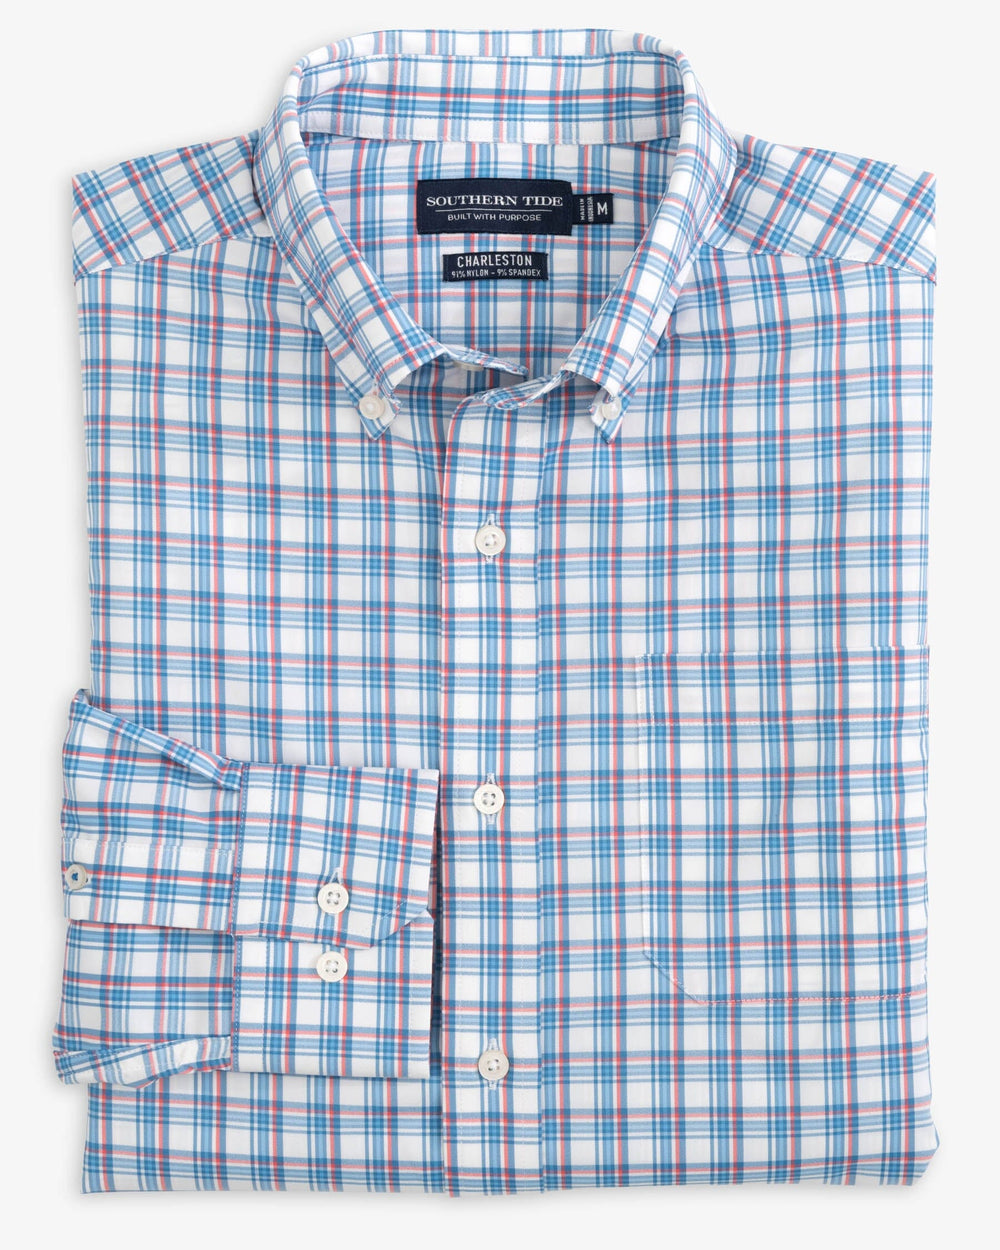 The folded view of the Southern Tide brrr Charleston Intercoastal Ashmore Plaid Long Sleeve Button Down Sport shirt by Southern Tide - Classic White